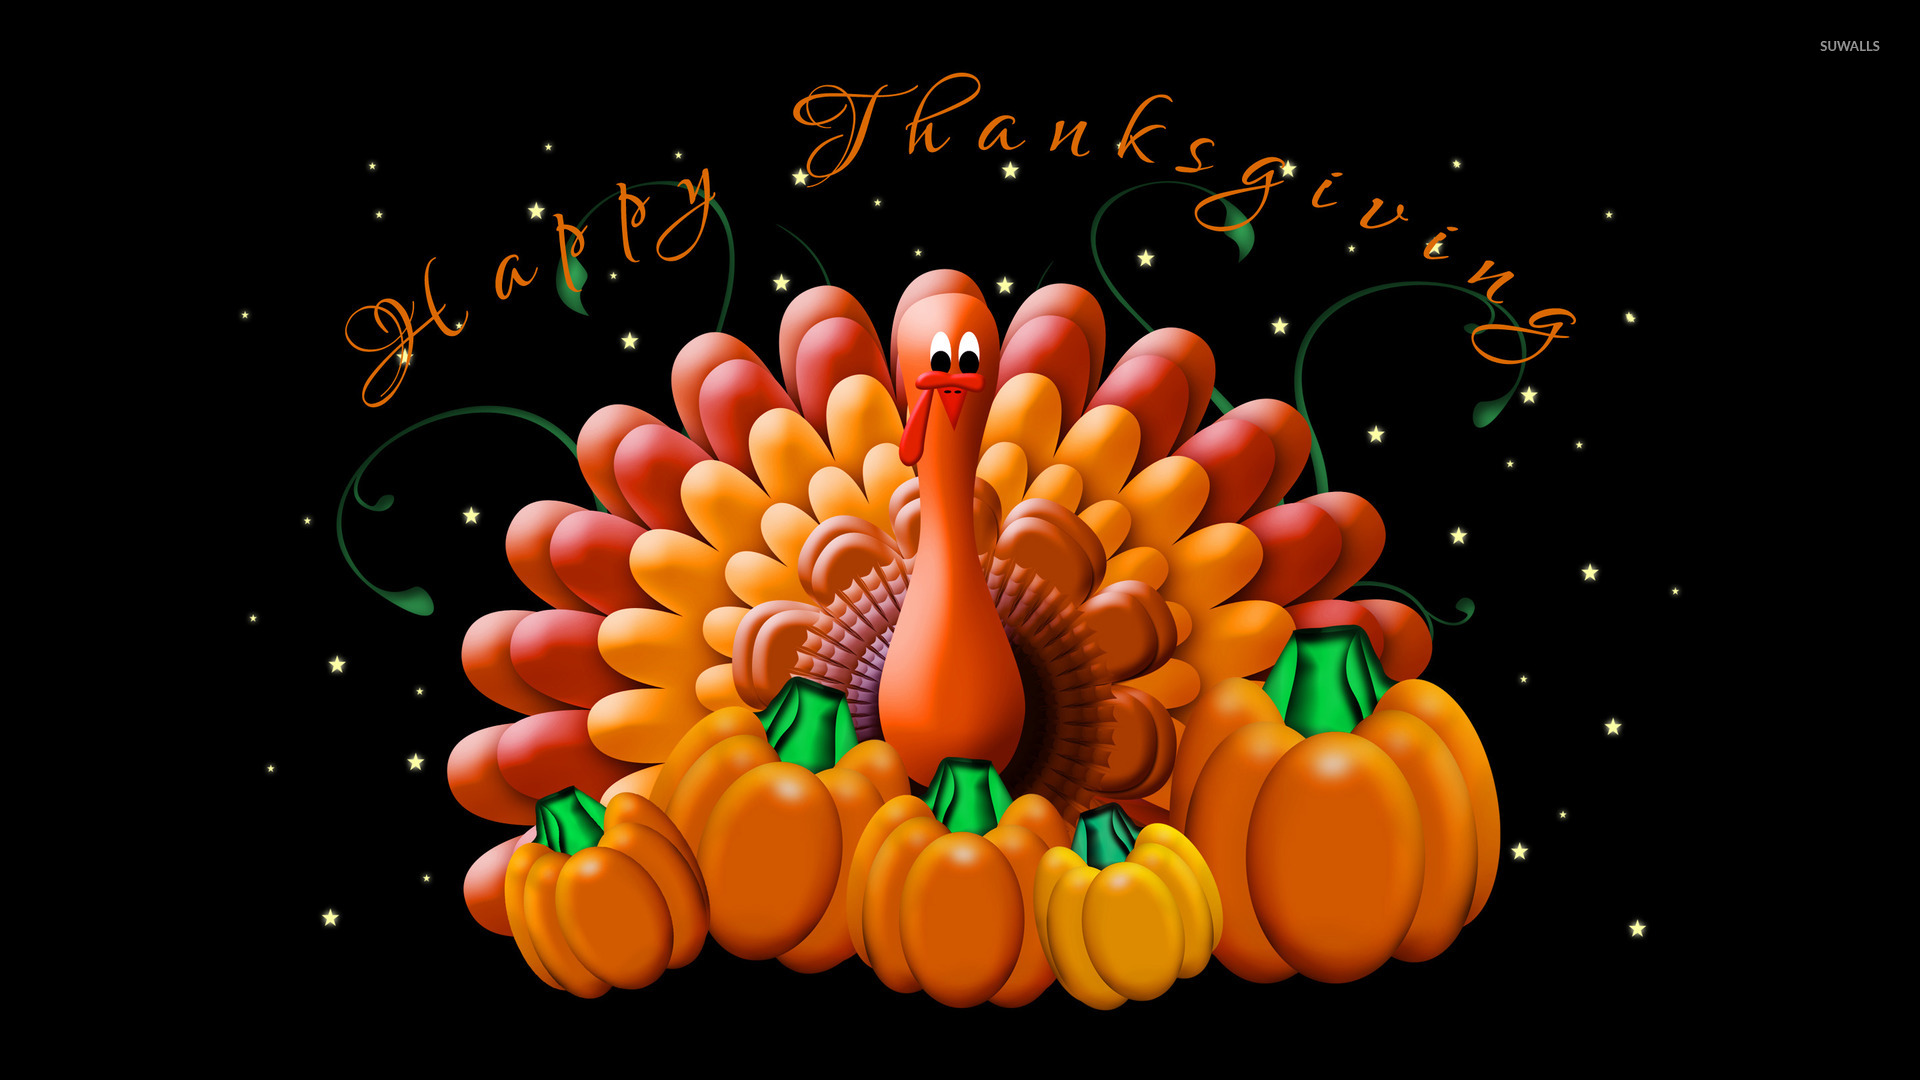 Happy Thanksgiving wallpaper   Holiday wallpapers   23972